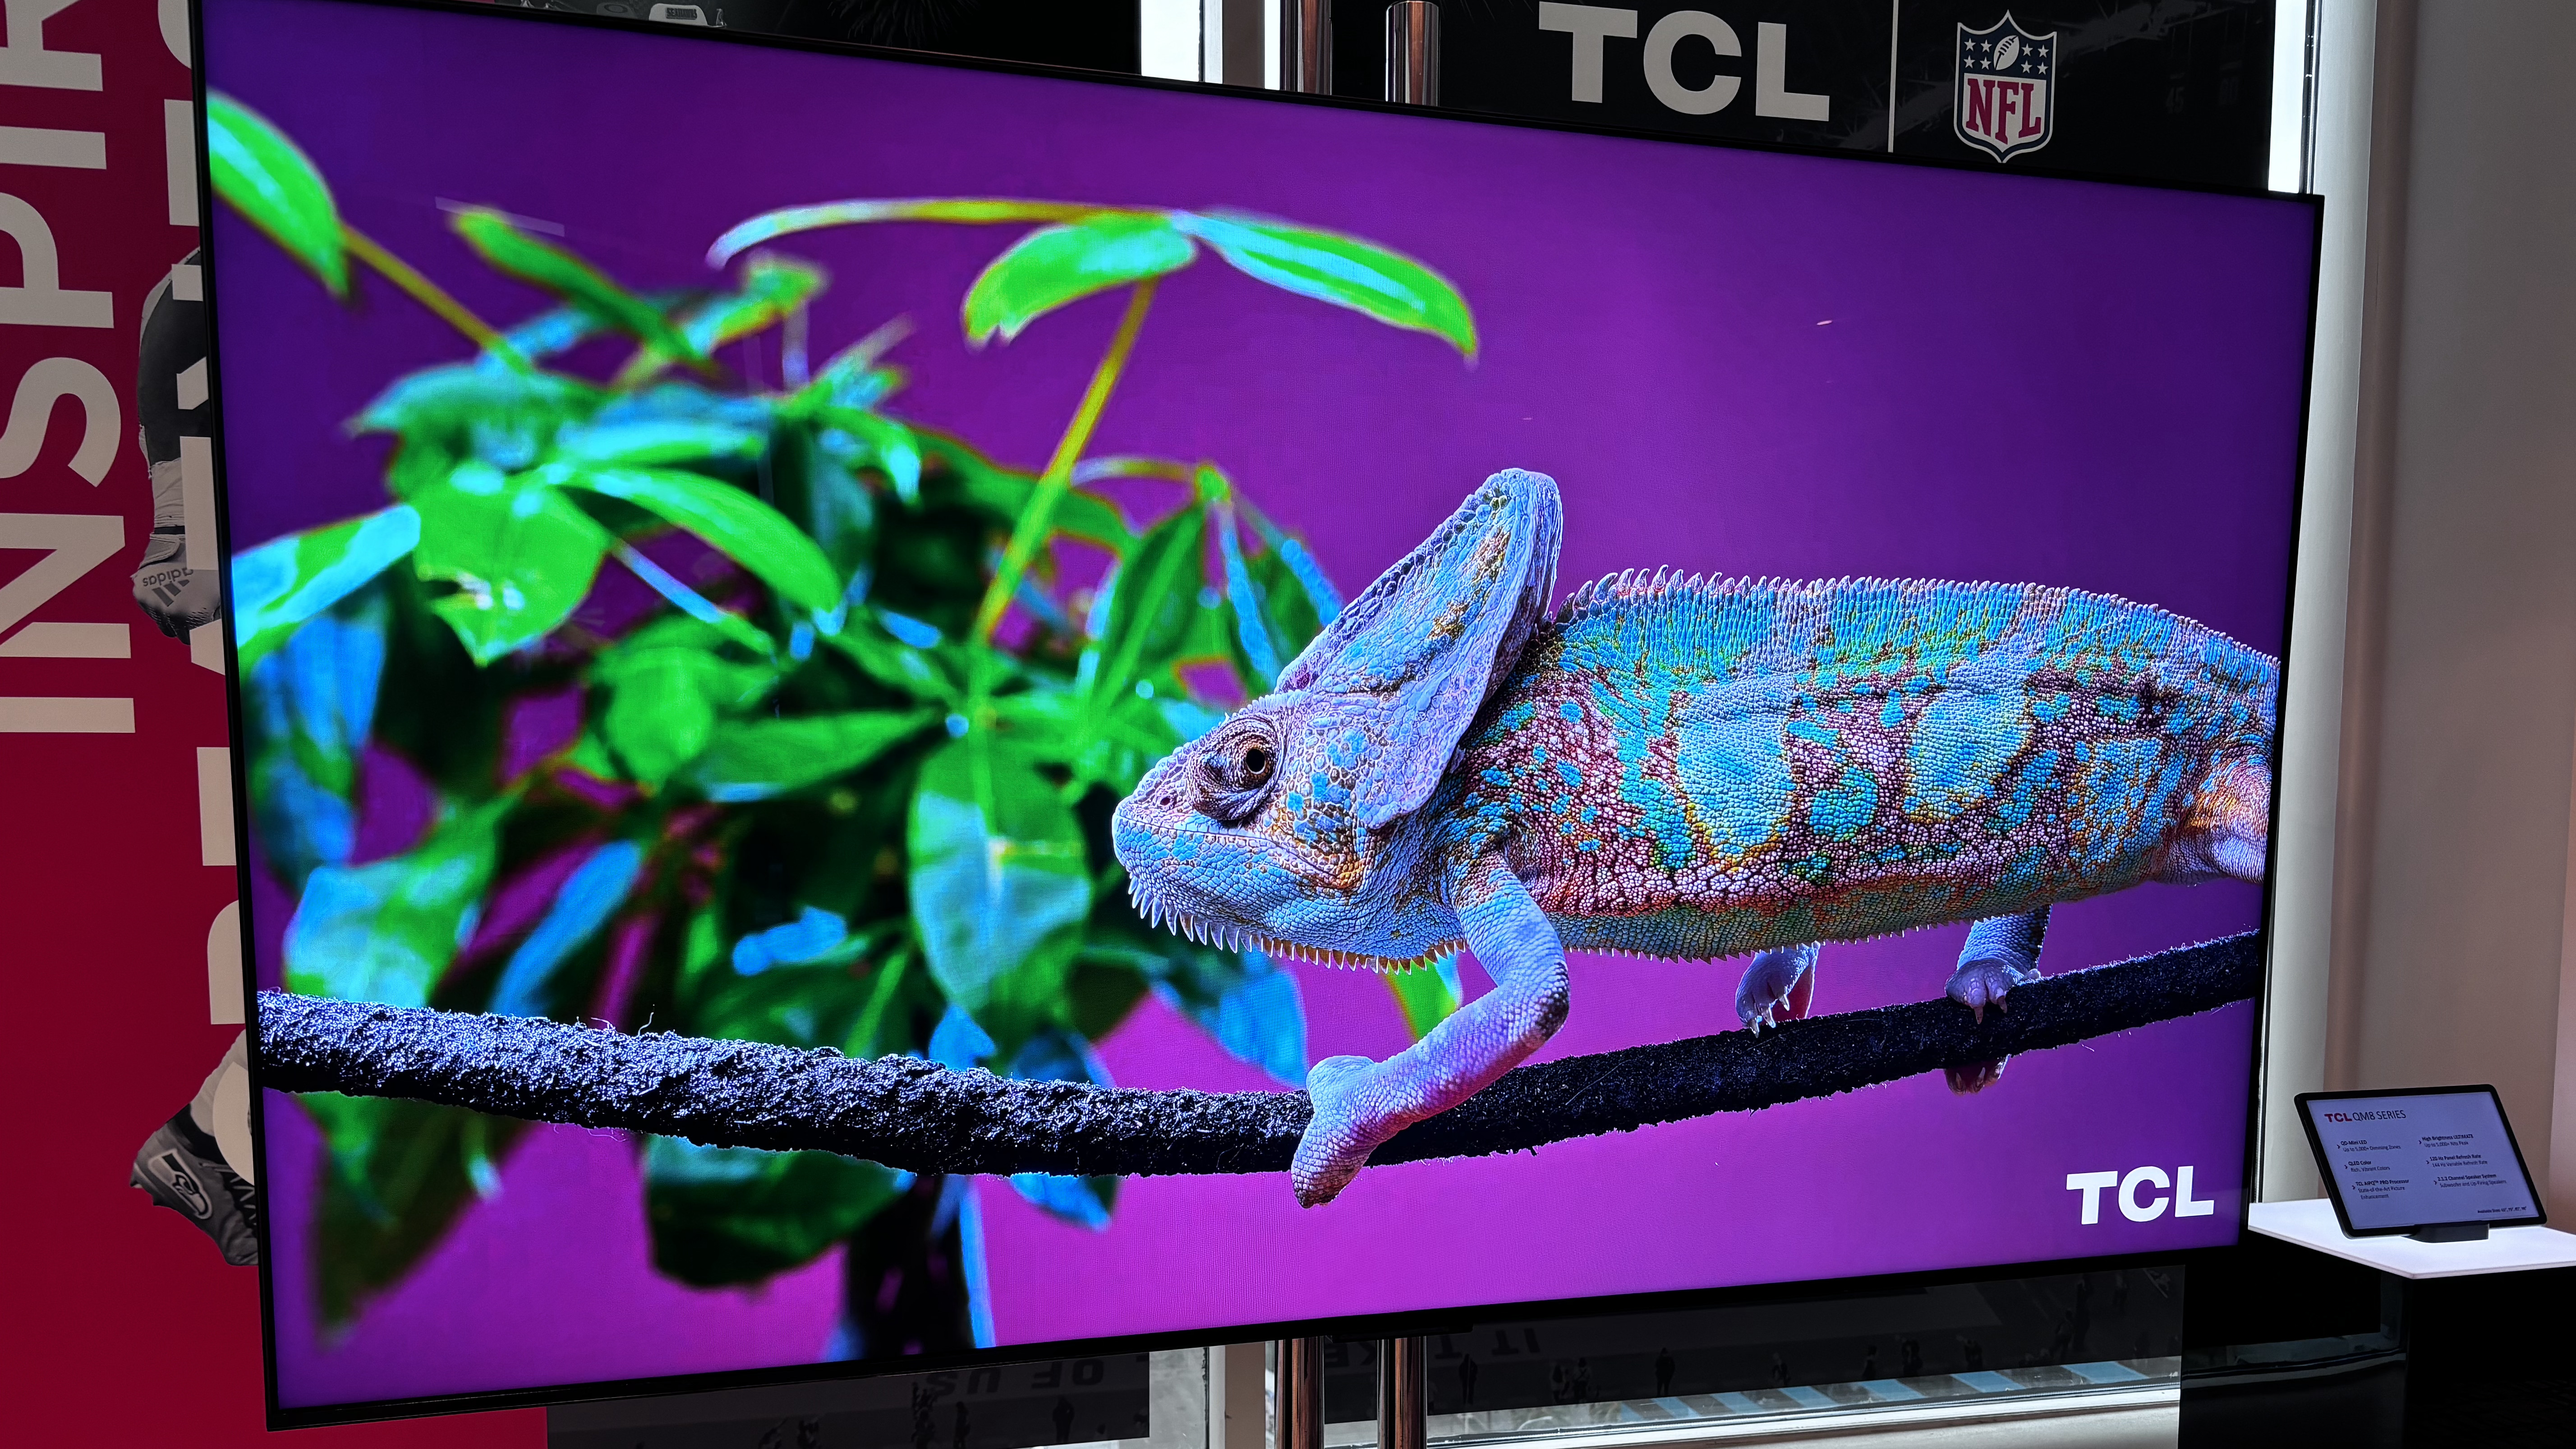 Hands on: TCL Mini-LED 8K TV (8 Series) review